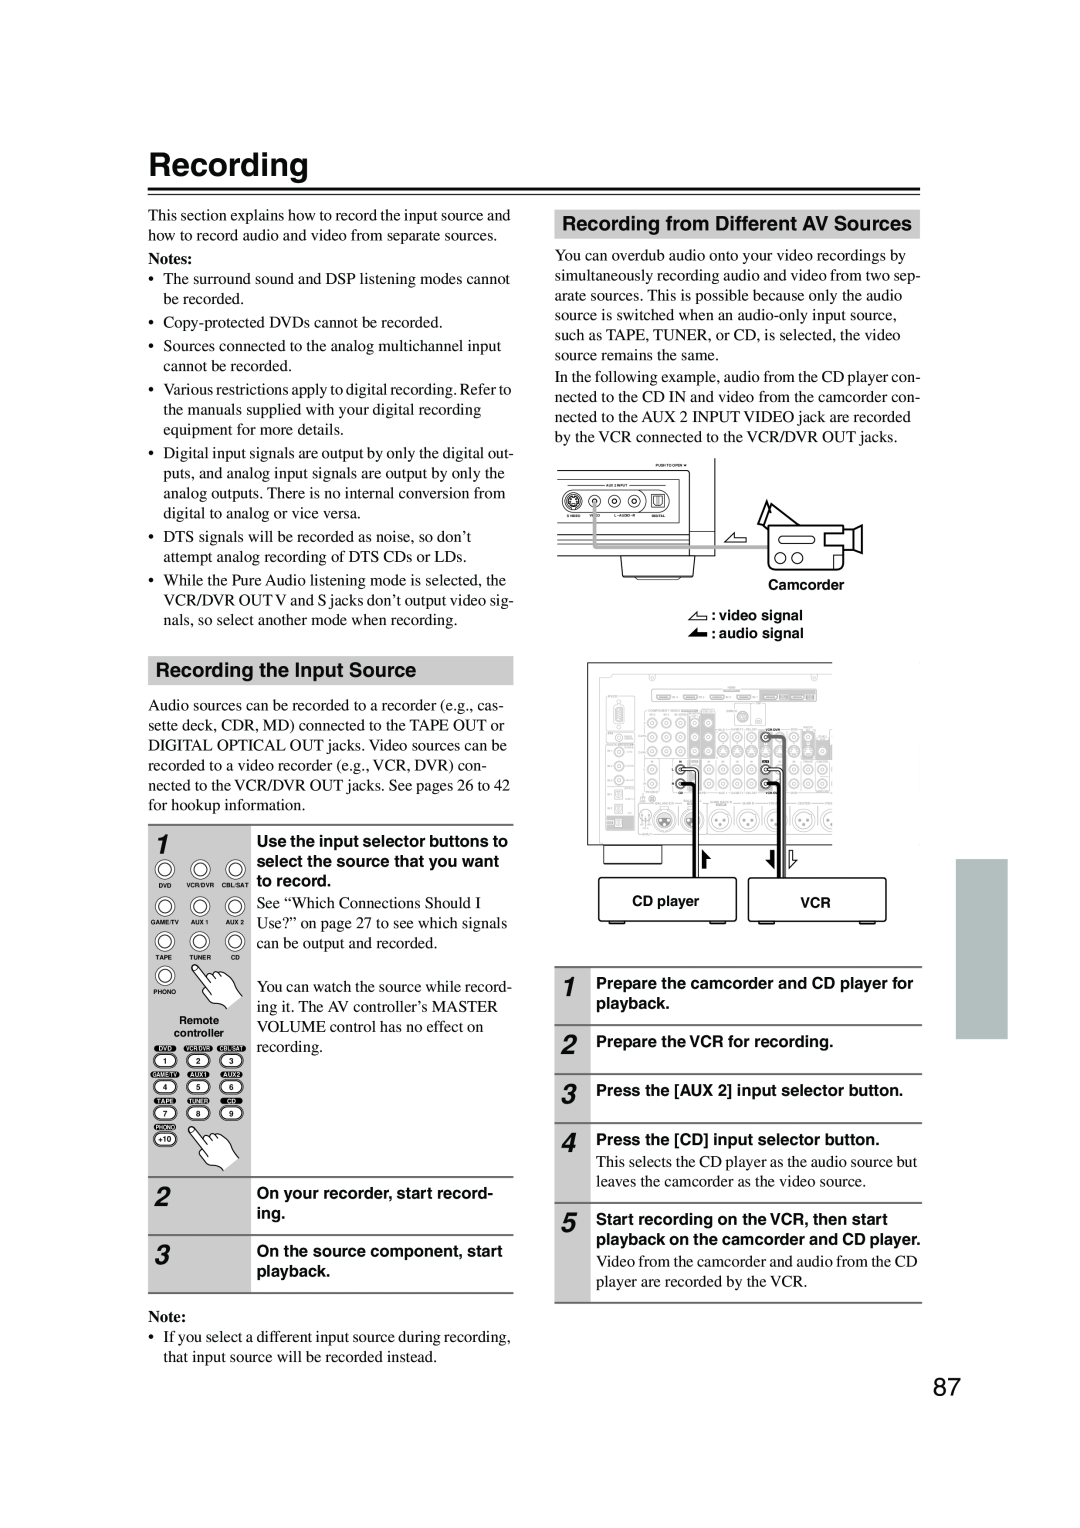 Onkyo PR-SC885 instruction manual Recording the Input Source, Recording from Different AV Sources, Notes 